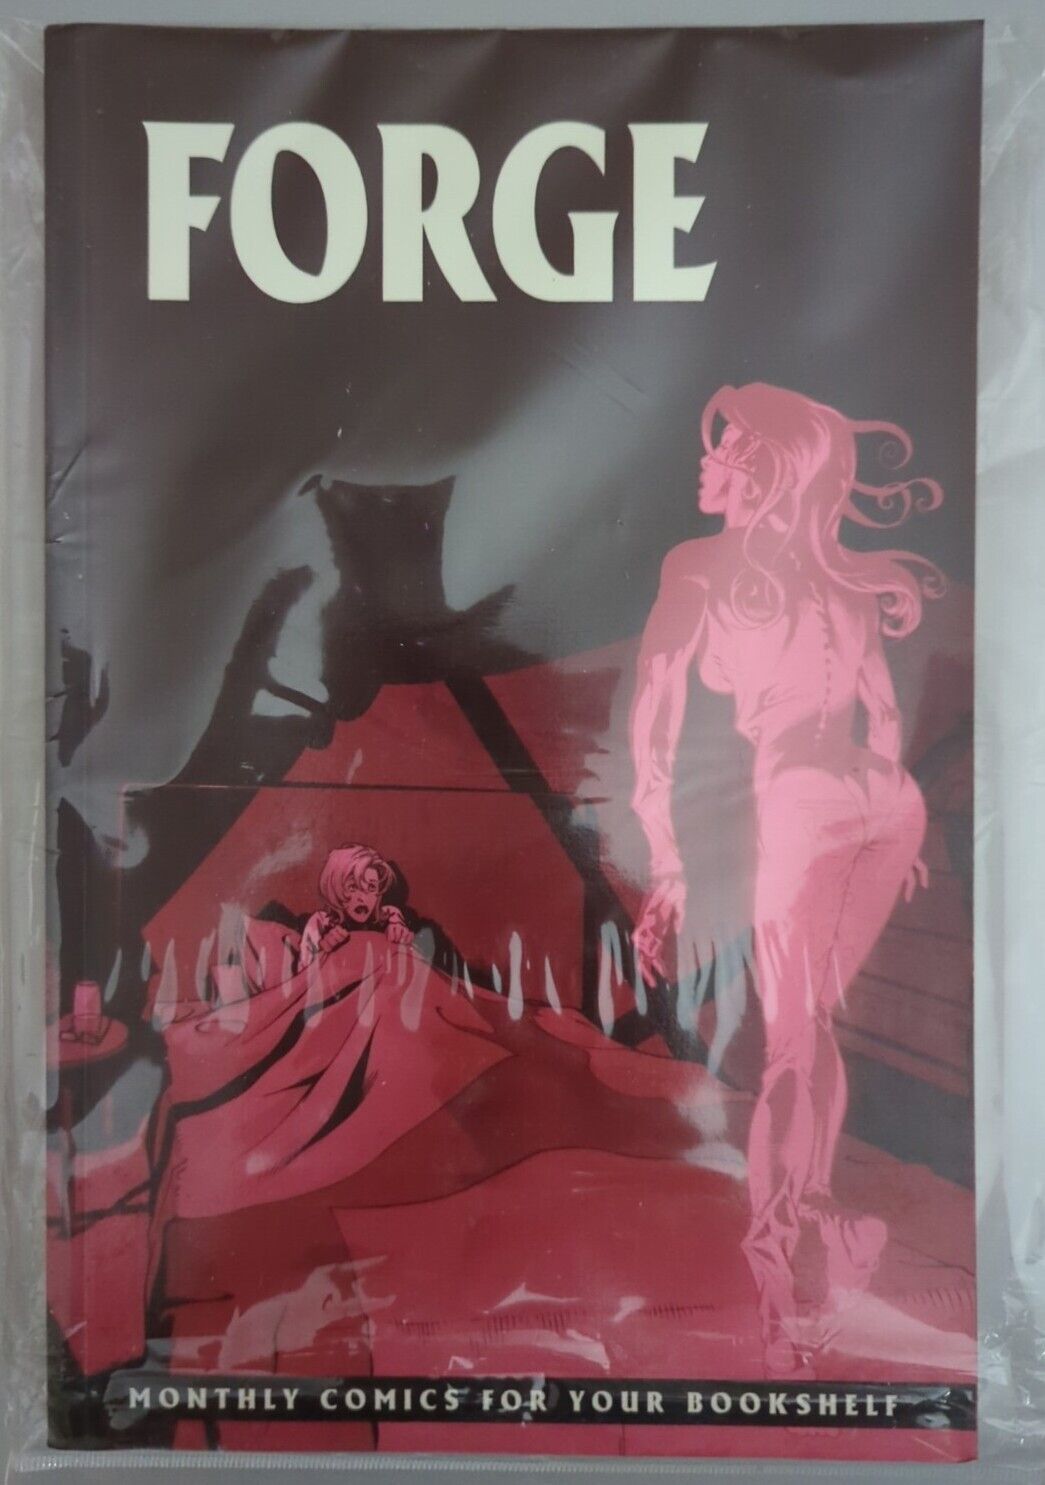 FORGE #7 By Chris Oarr **BRAND NEW**